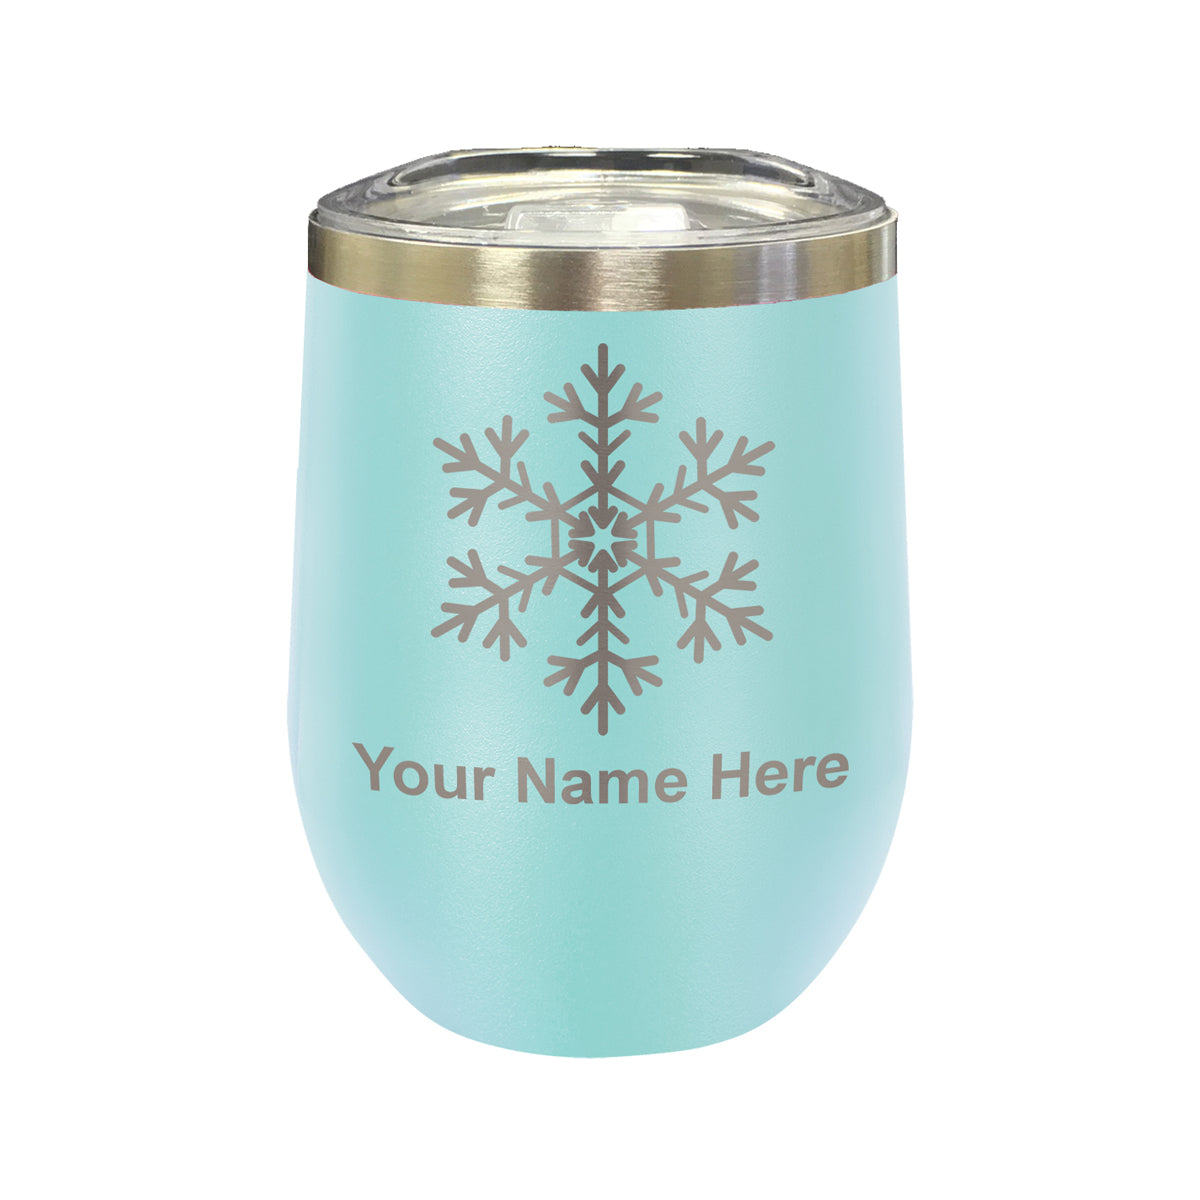 LaserGram Double Wall Stainless Steel Wine Glass, Snowflake, Personalized Engraving Included